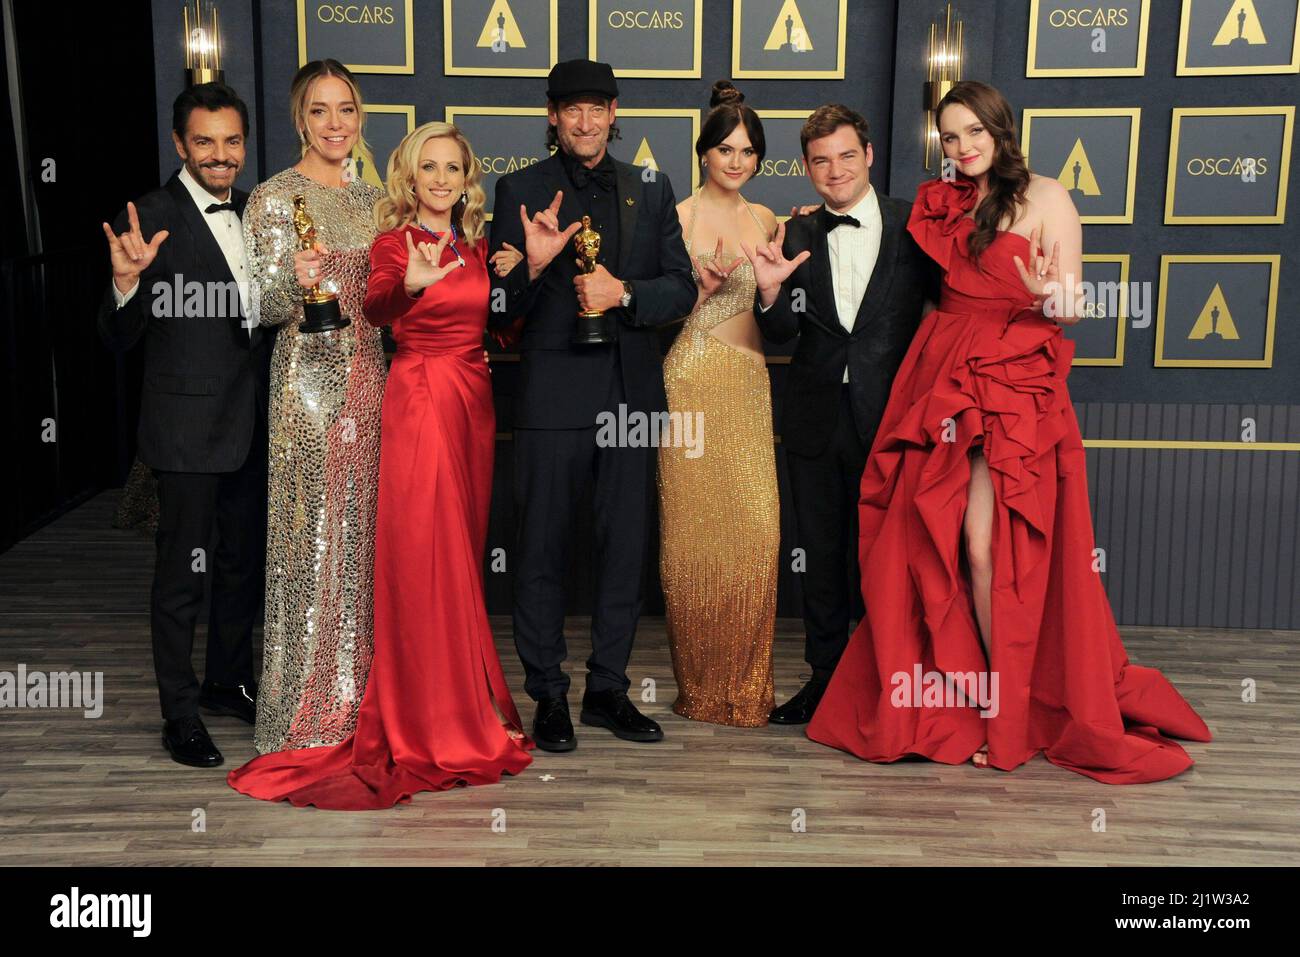 Los Angeles, CA. 27th Mar, 2022. Emilia Jones, Daniel Durant, Sian Heder, Marlee Matlin, Eugenio Derbez, Fabrice Gianfermi, Patrick Wachsberger, Troy Kotsur, Amy Forsyth, Philippe Rousselet in the press room for 94th Academy Awards - Press Room, Dolby Theatre, Los Angeles, CA March 27, 2022. Credit: Elizabeth Goodenough/Everett Collection/Alamy Live News Stock Photo